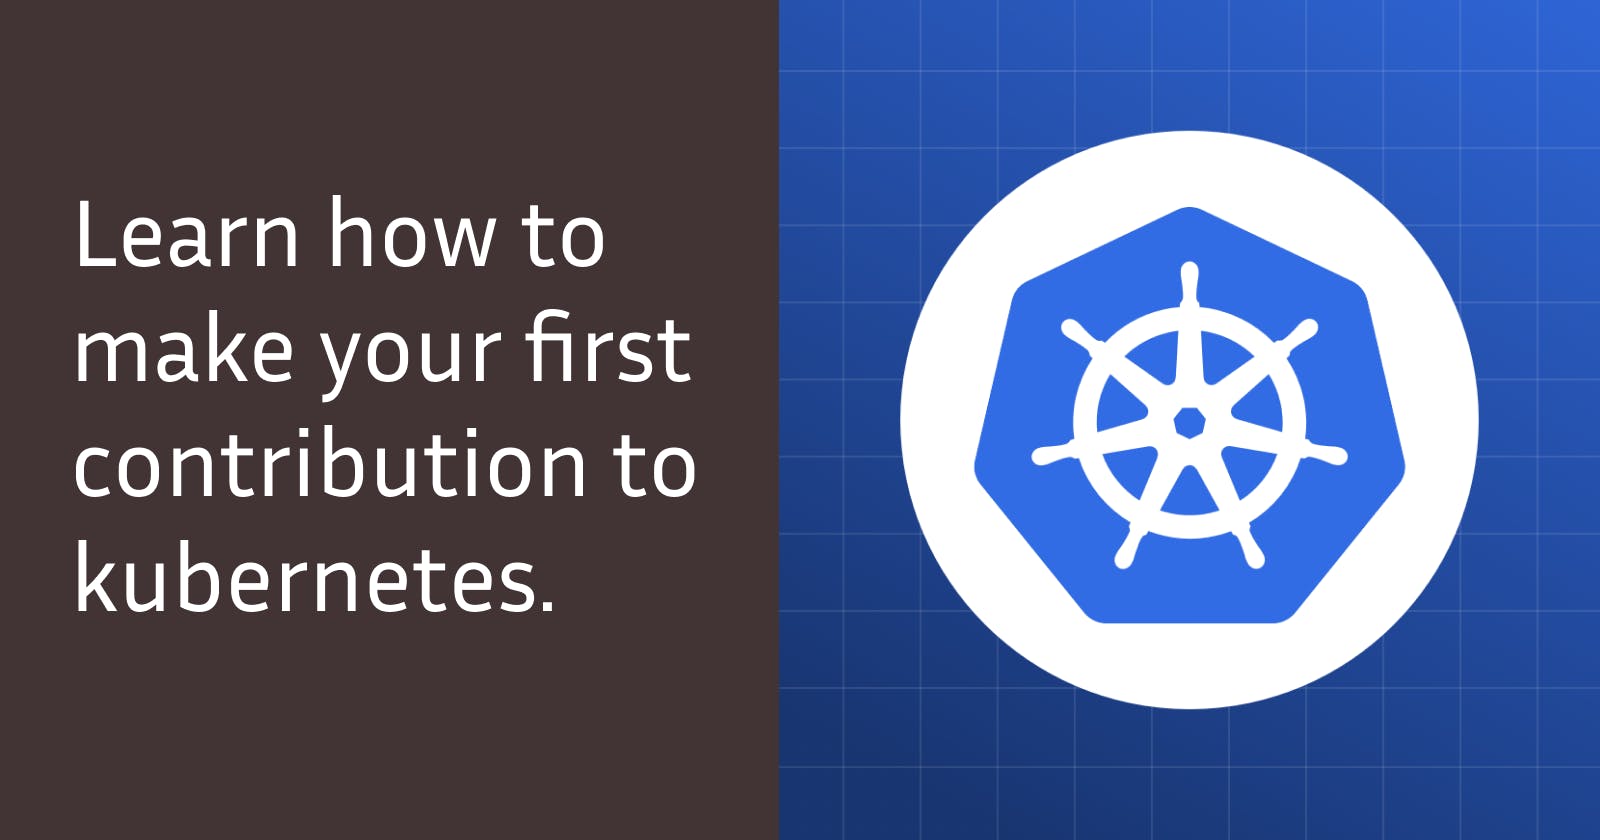 Get Started with Contributing to Kubernetes